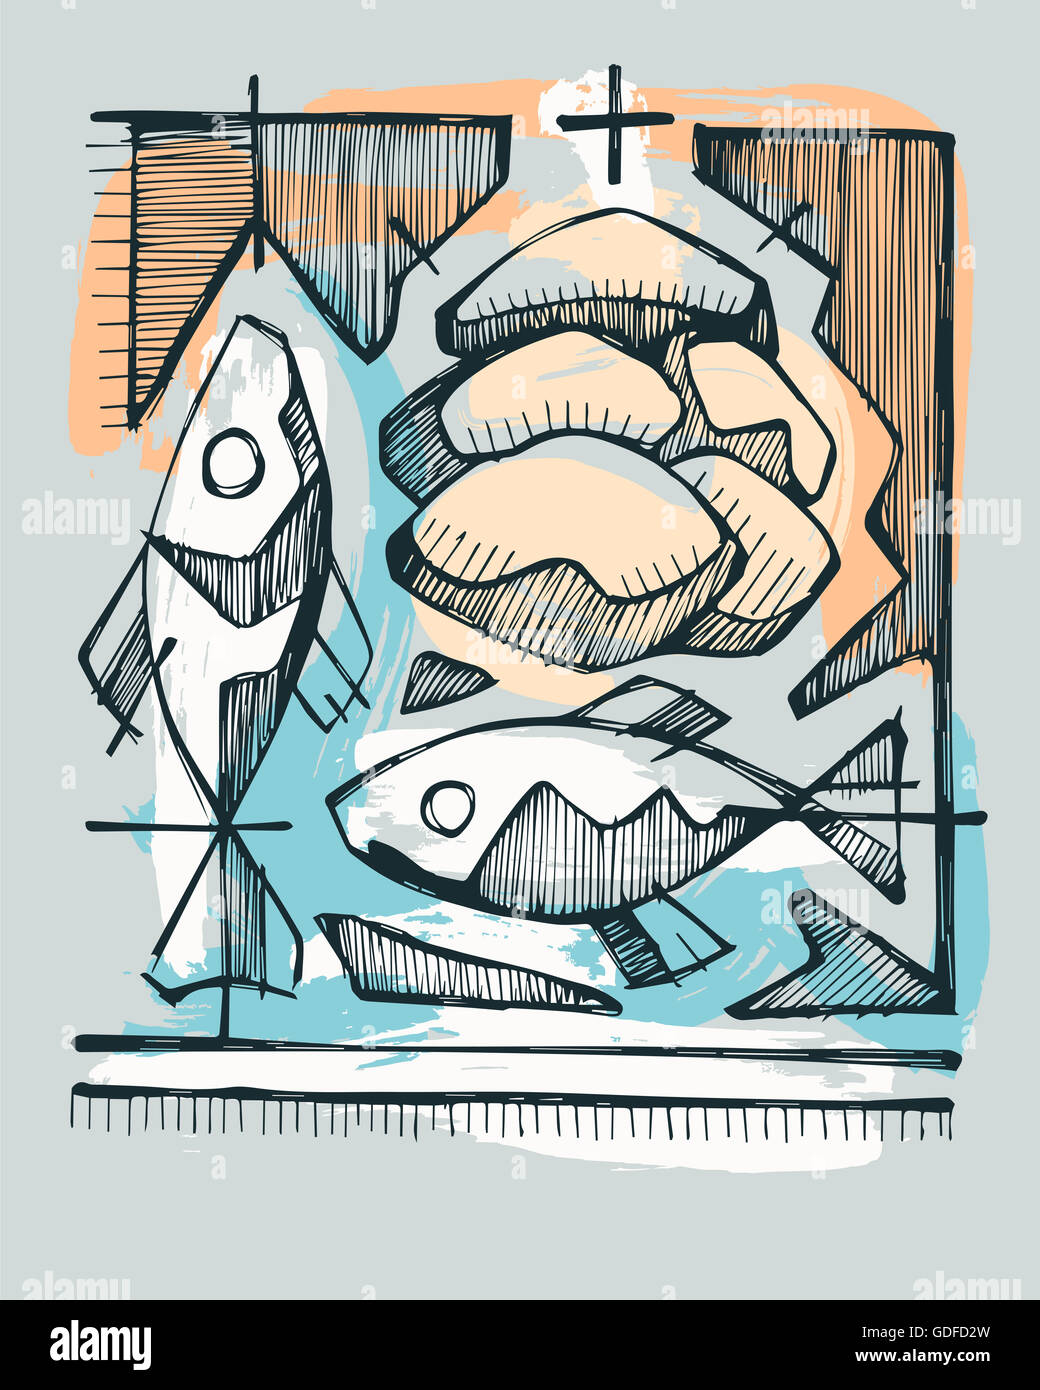 Hand drawn  illustration or drawing of 2 fishes and 5 breads, representing Catholic Sacrament of Eucharist Stock Photo